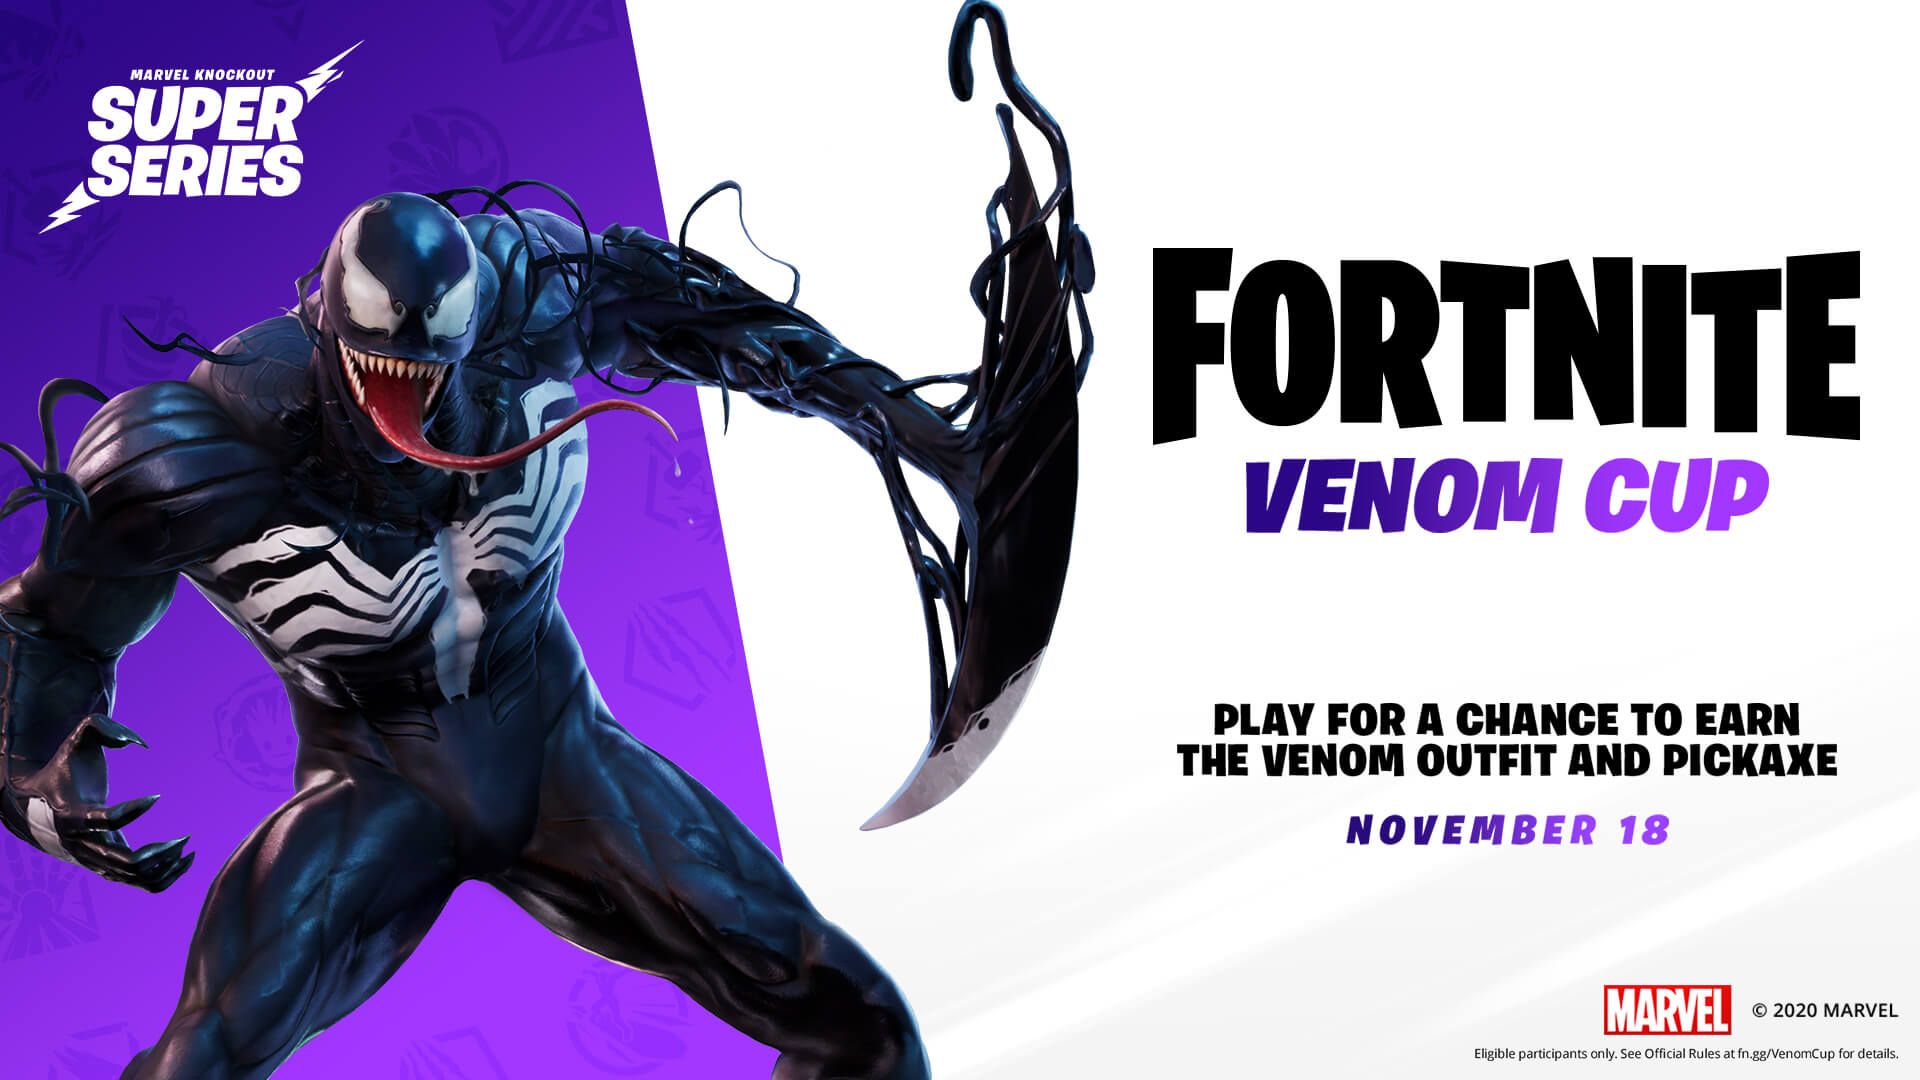 The Fortnite Marvel Super Series Wraps Up with the Venom Cup and the $1M Super Cup